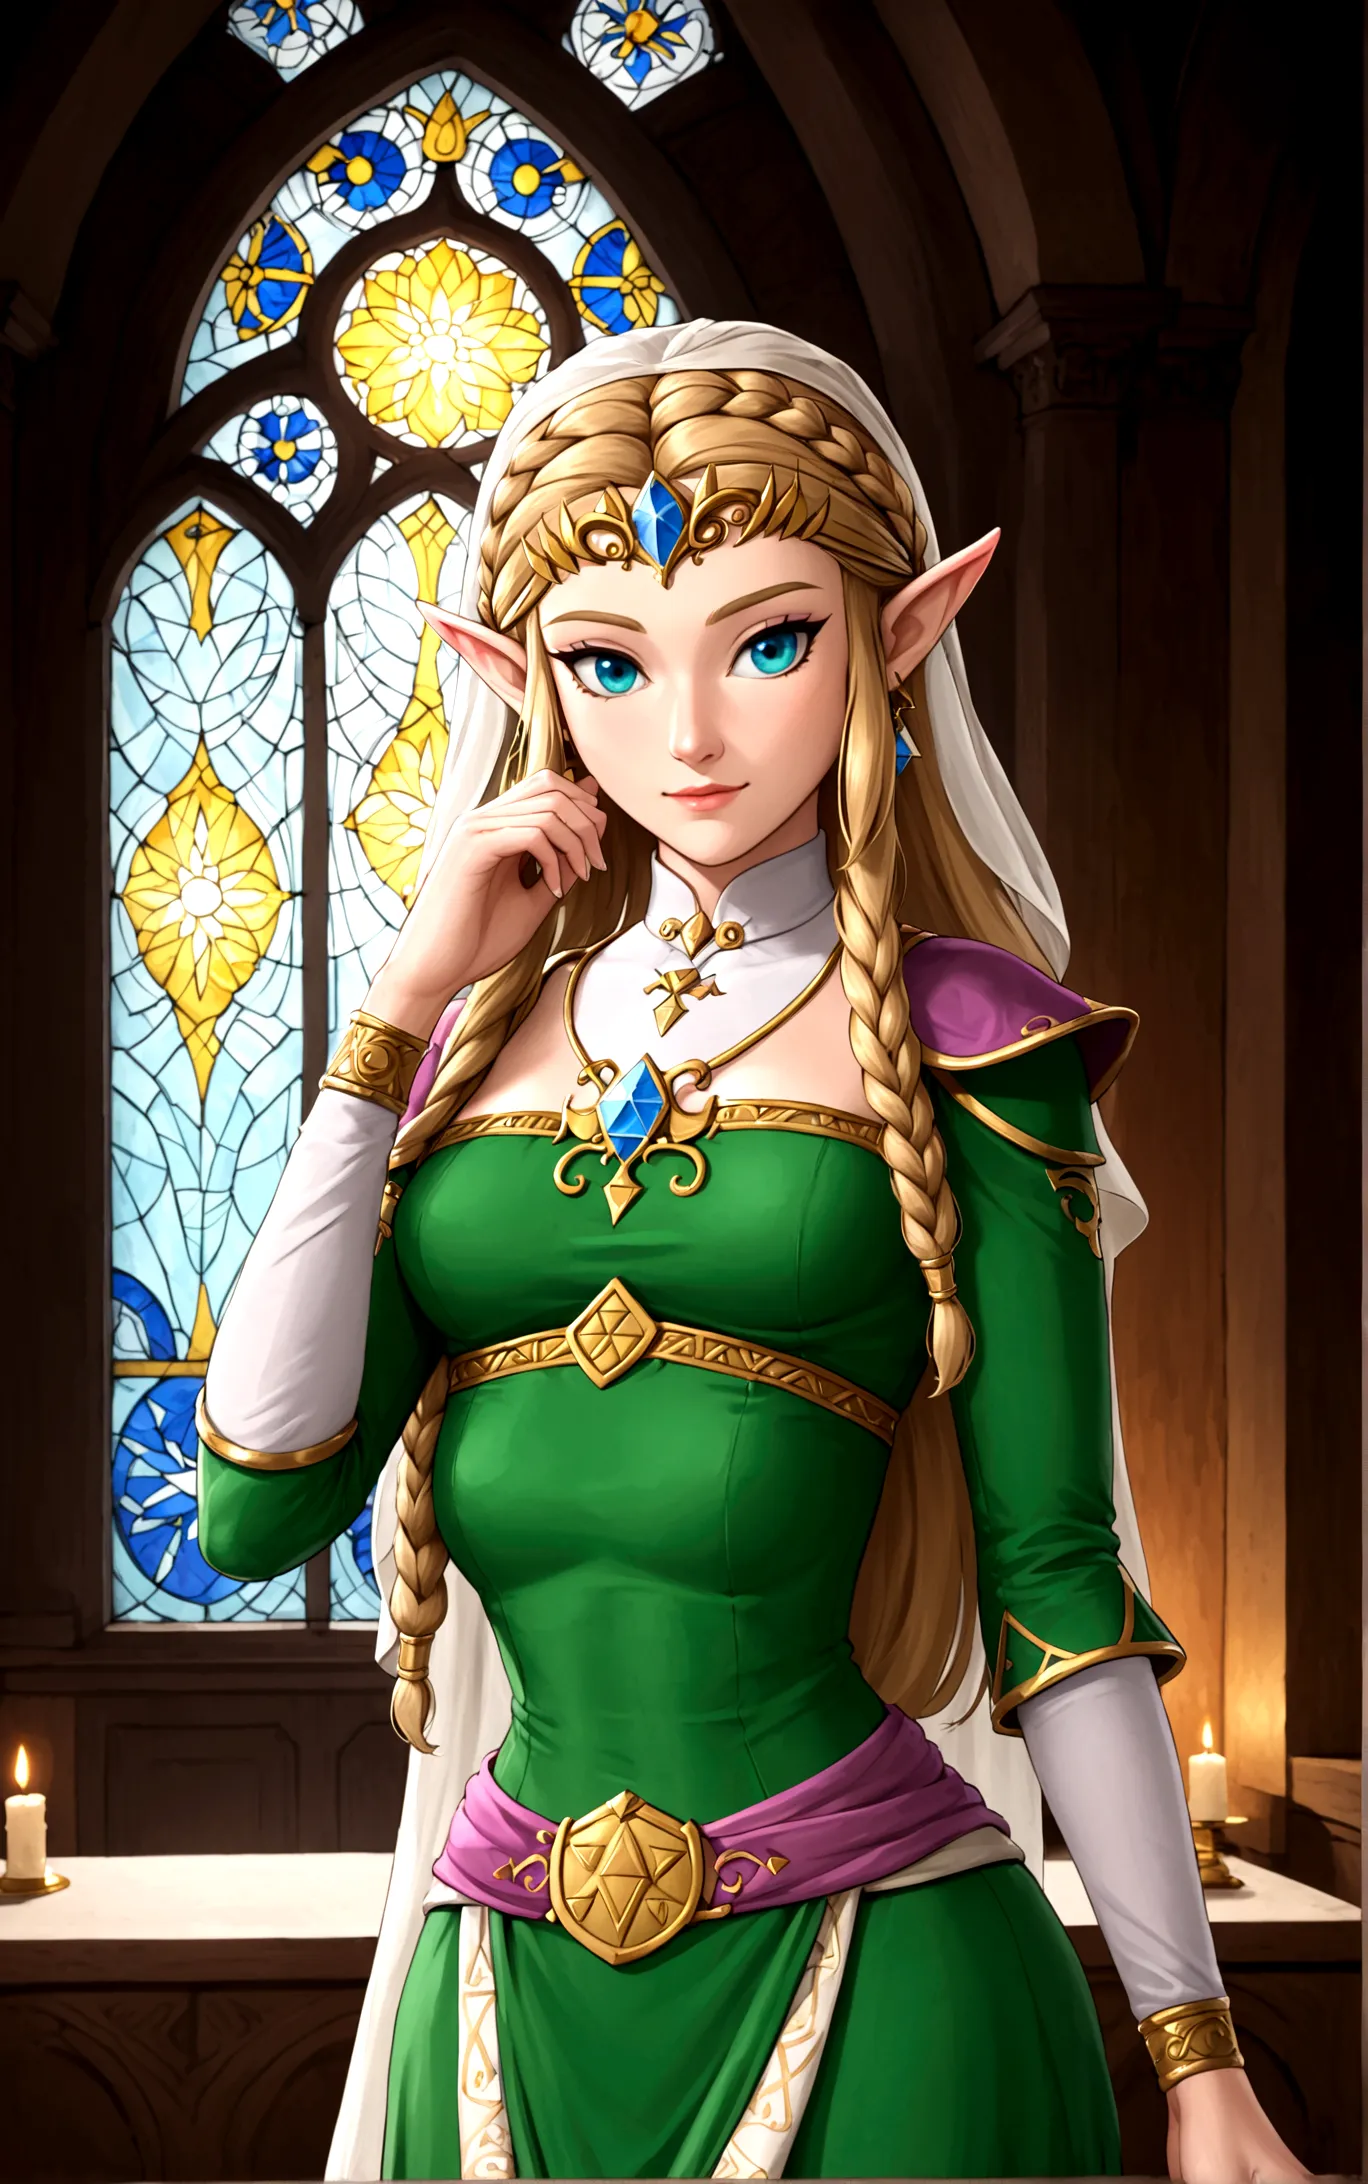 Cate Blanchett (age 25, elf ears, Twilight princess Zelda costume), heroic pose, lavish room with stained glass
